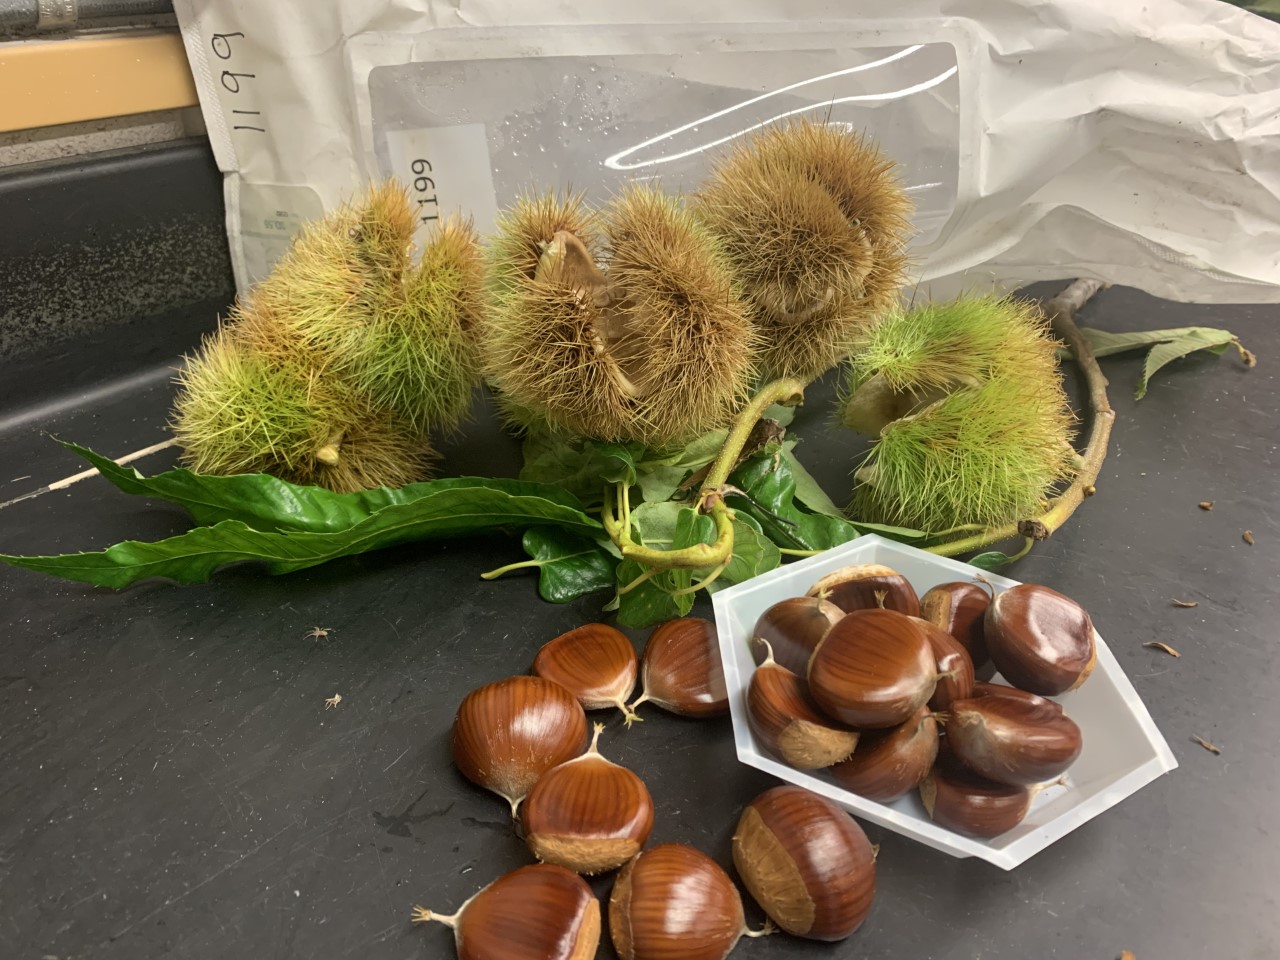 American chestnuts harvested